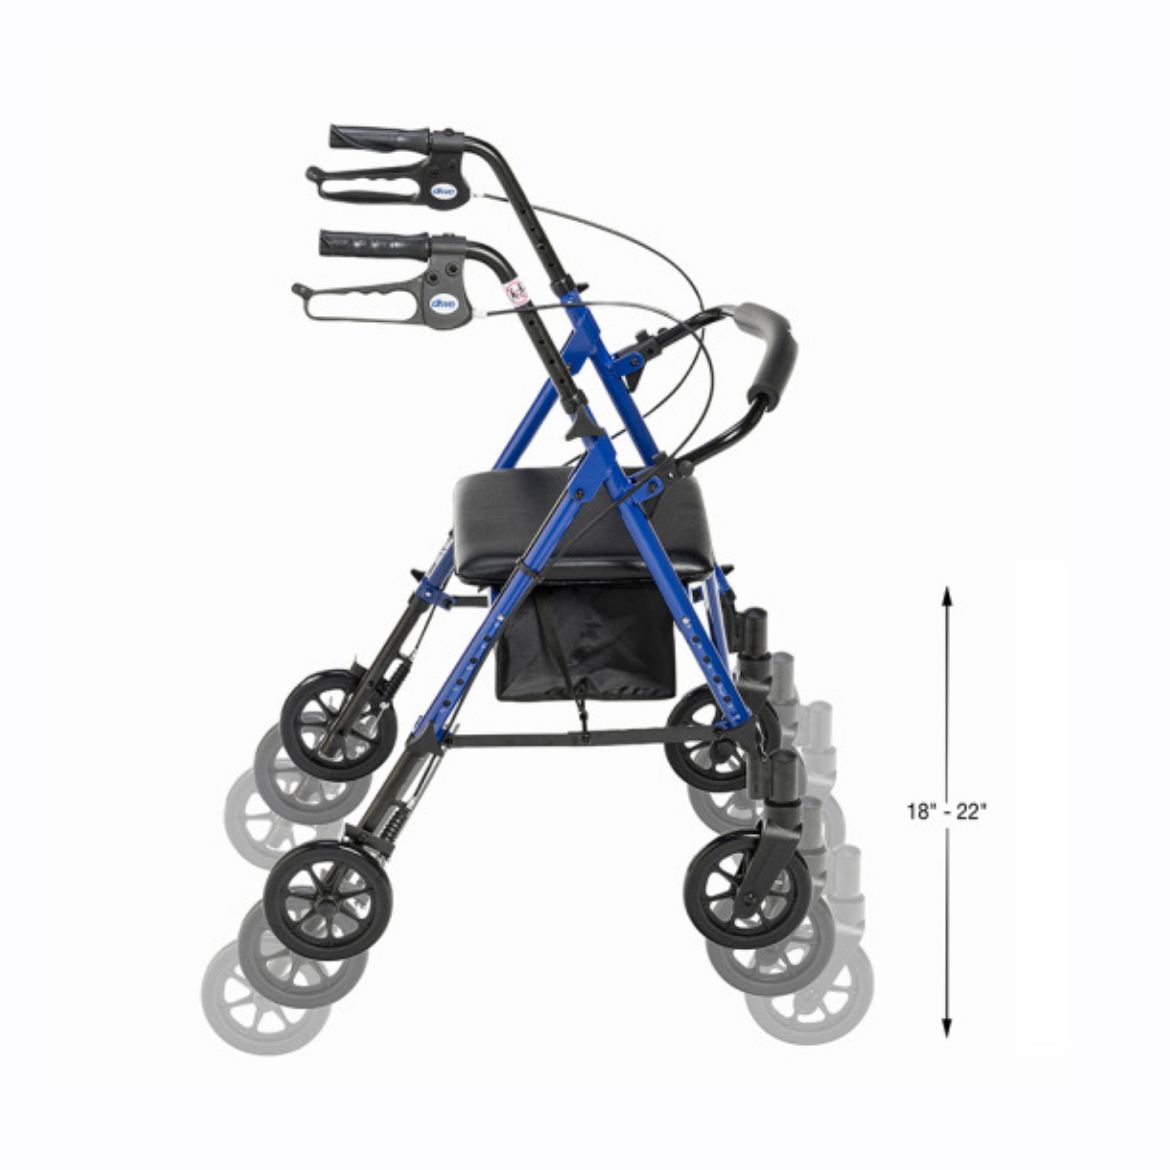 Picture of Adjustable Height Rollator, 6" Casters